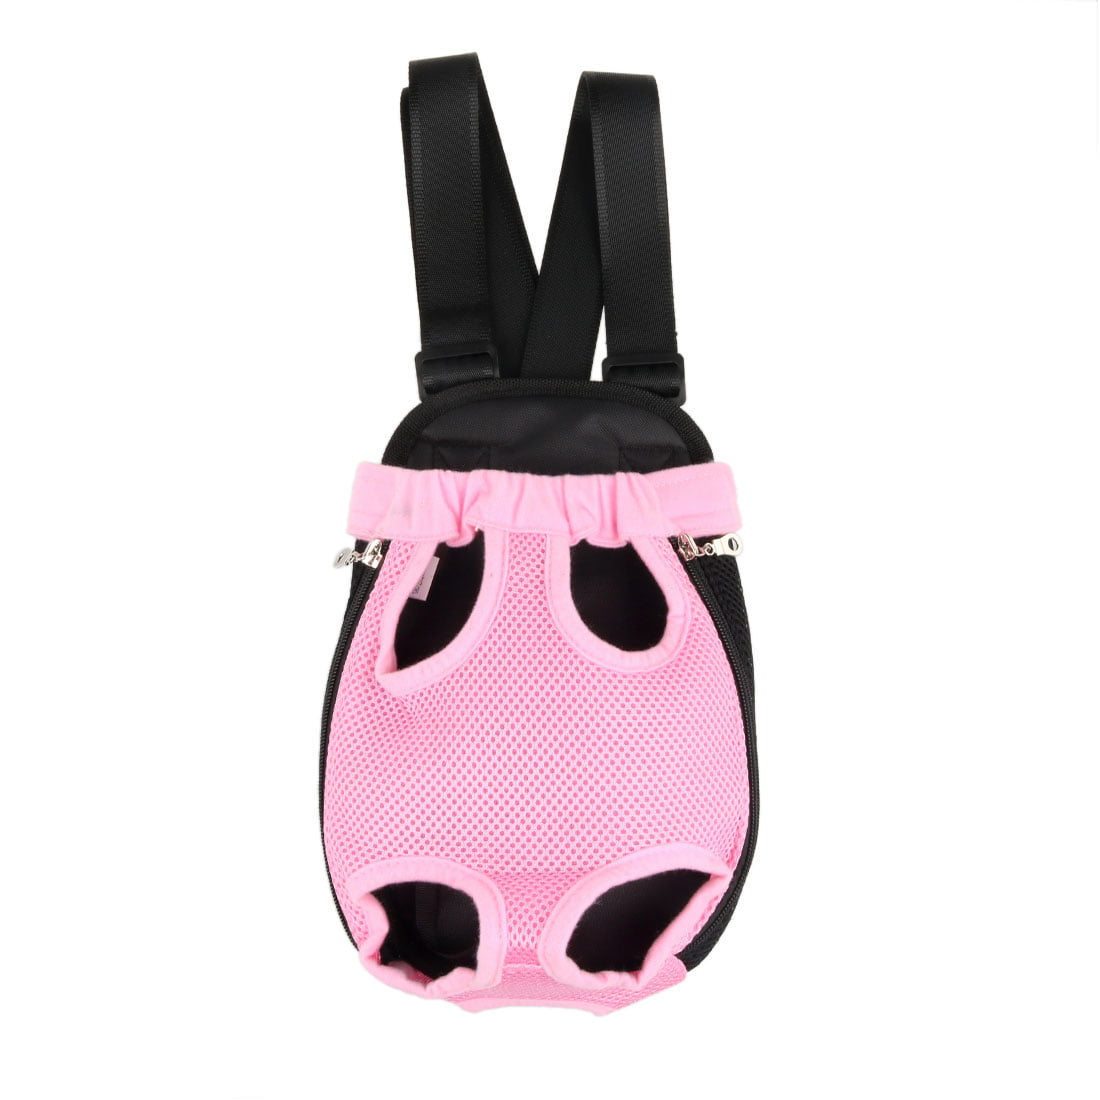 Pet Dog Carrier Legs Out Front Chest Backpack Travel Cat Puppy Tote Holder Bag | Walmart Canada